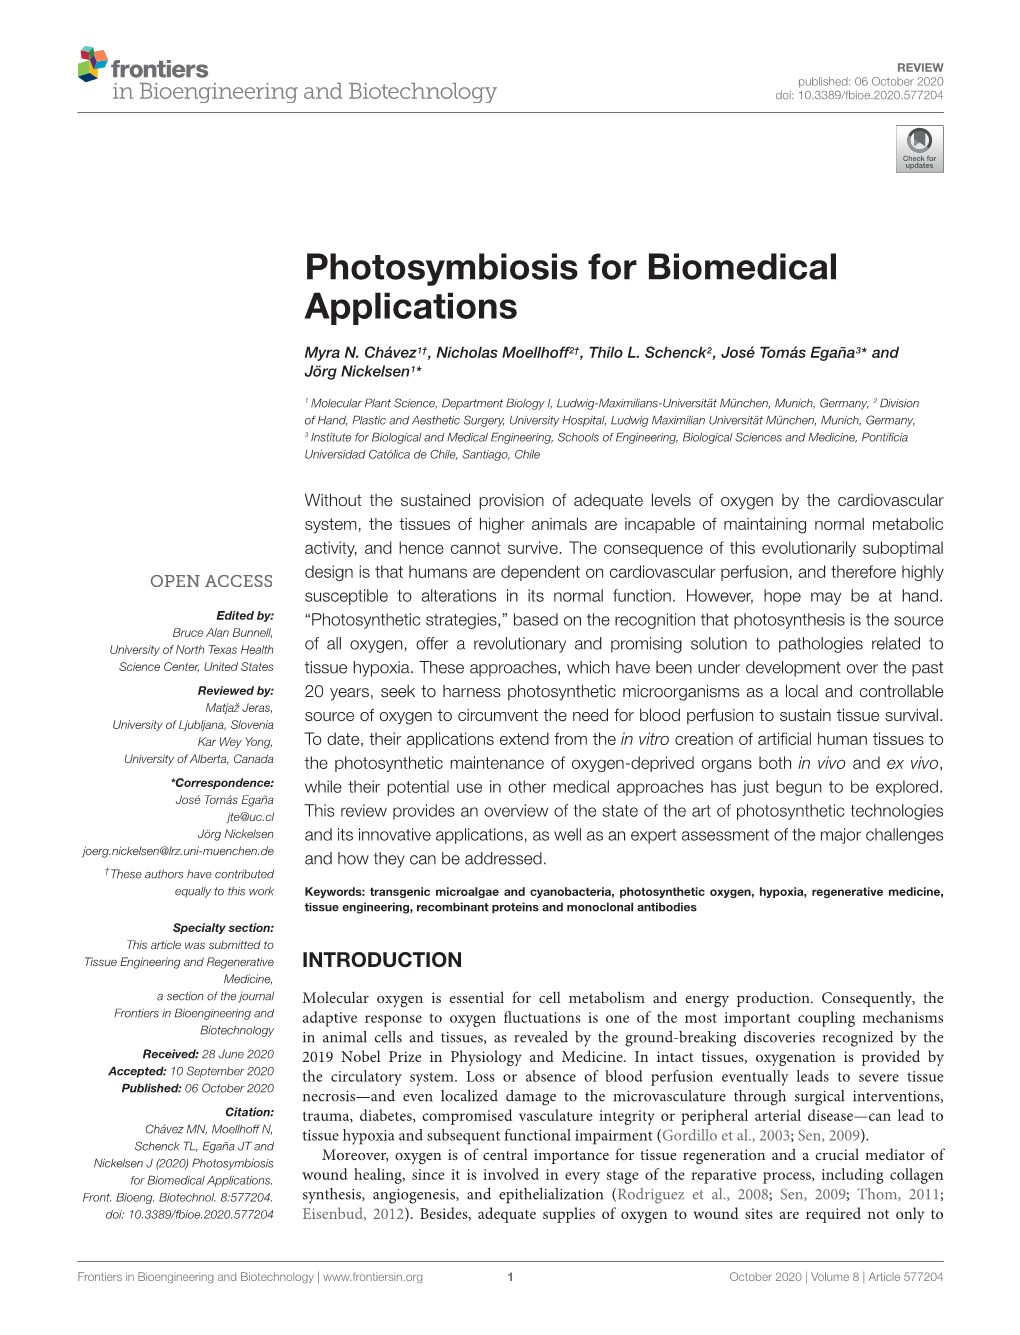 Photosymbiosis for Biomedical Applications